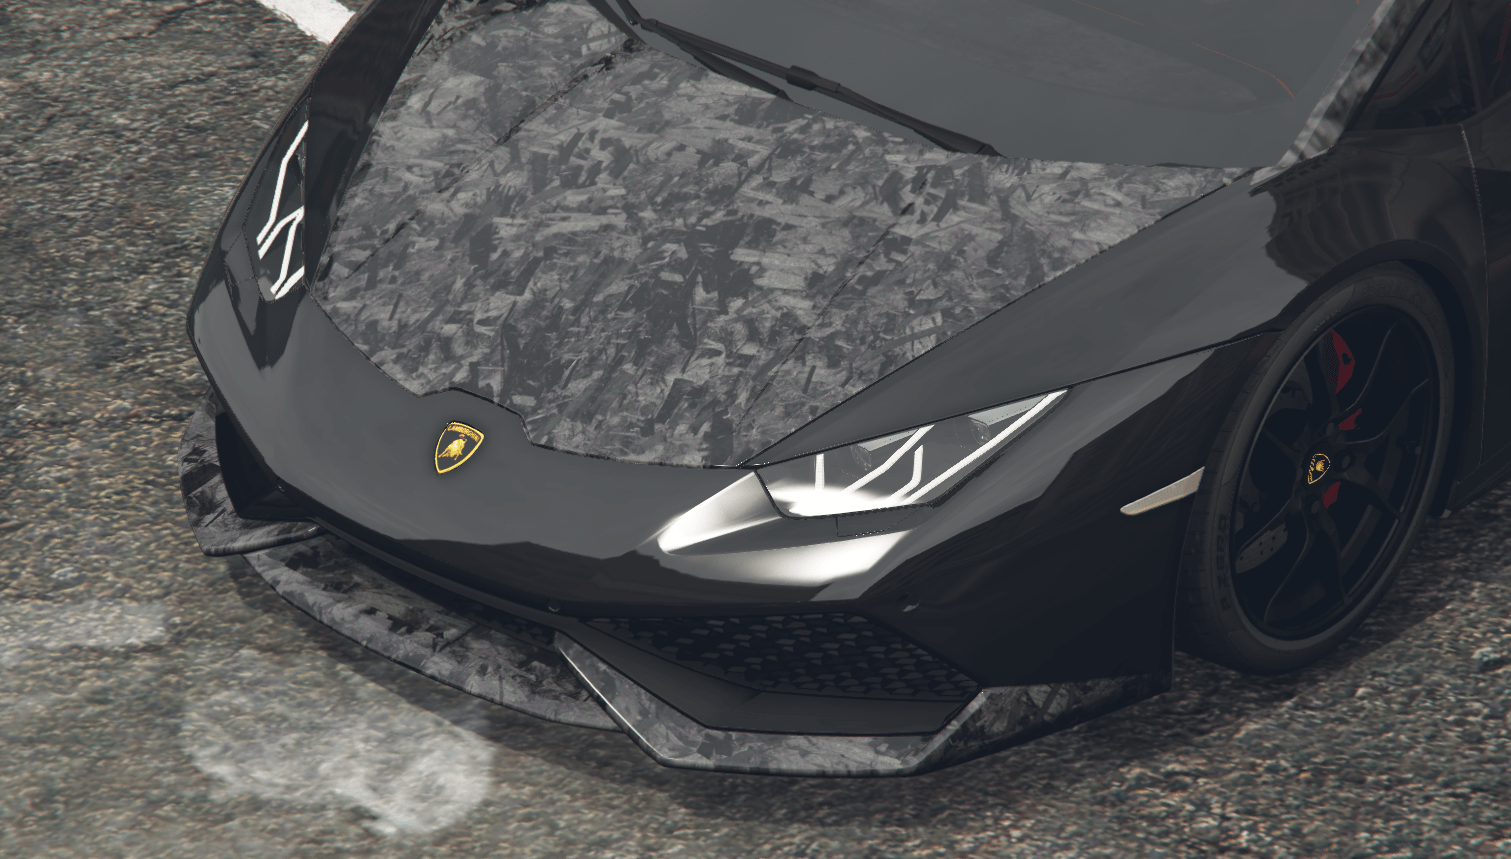 Lamborghini Huracan Forged Composite Material (Inspired by 1016 Industries)  